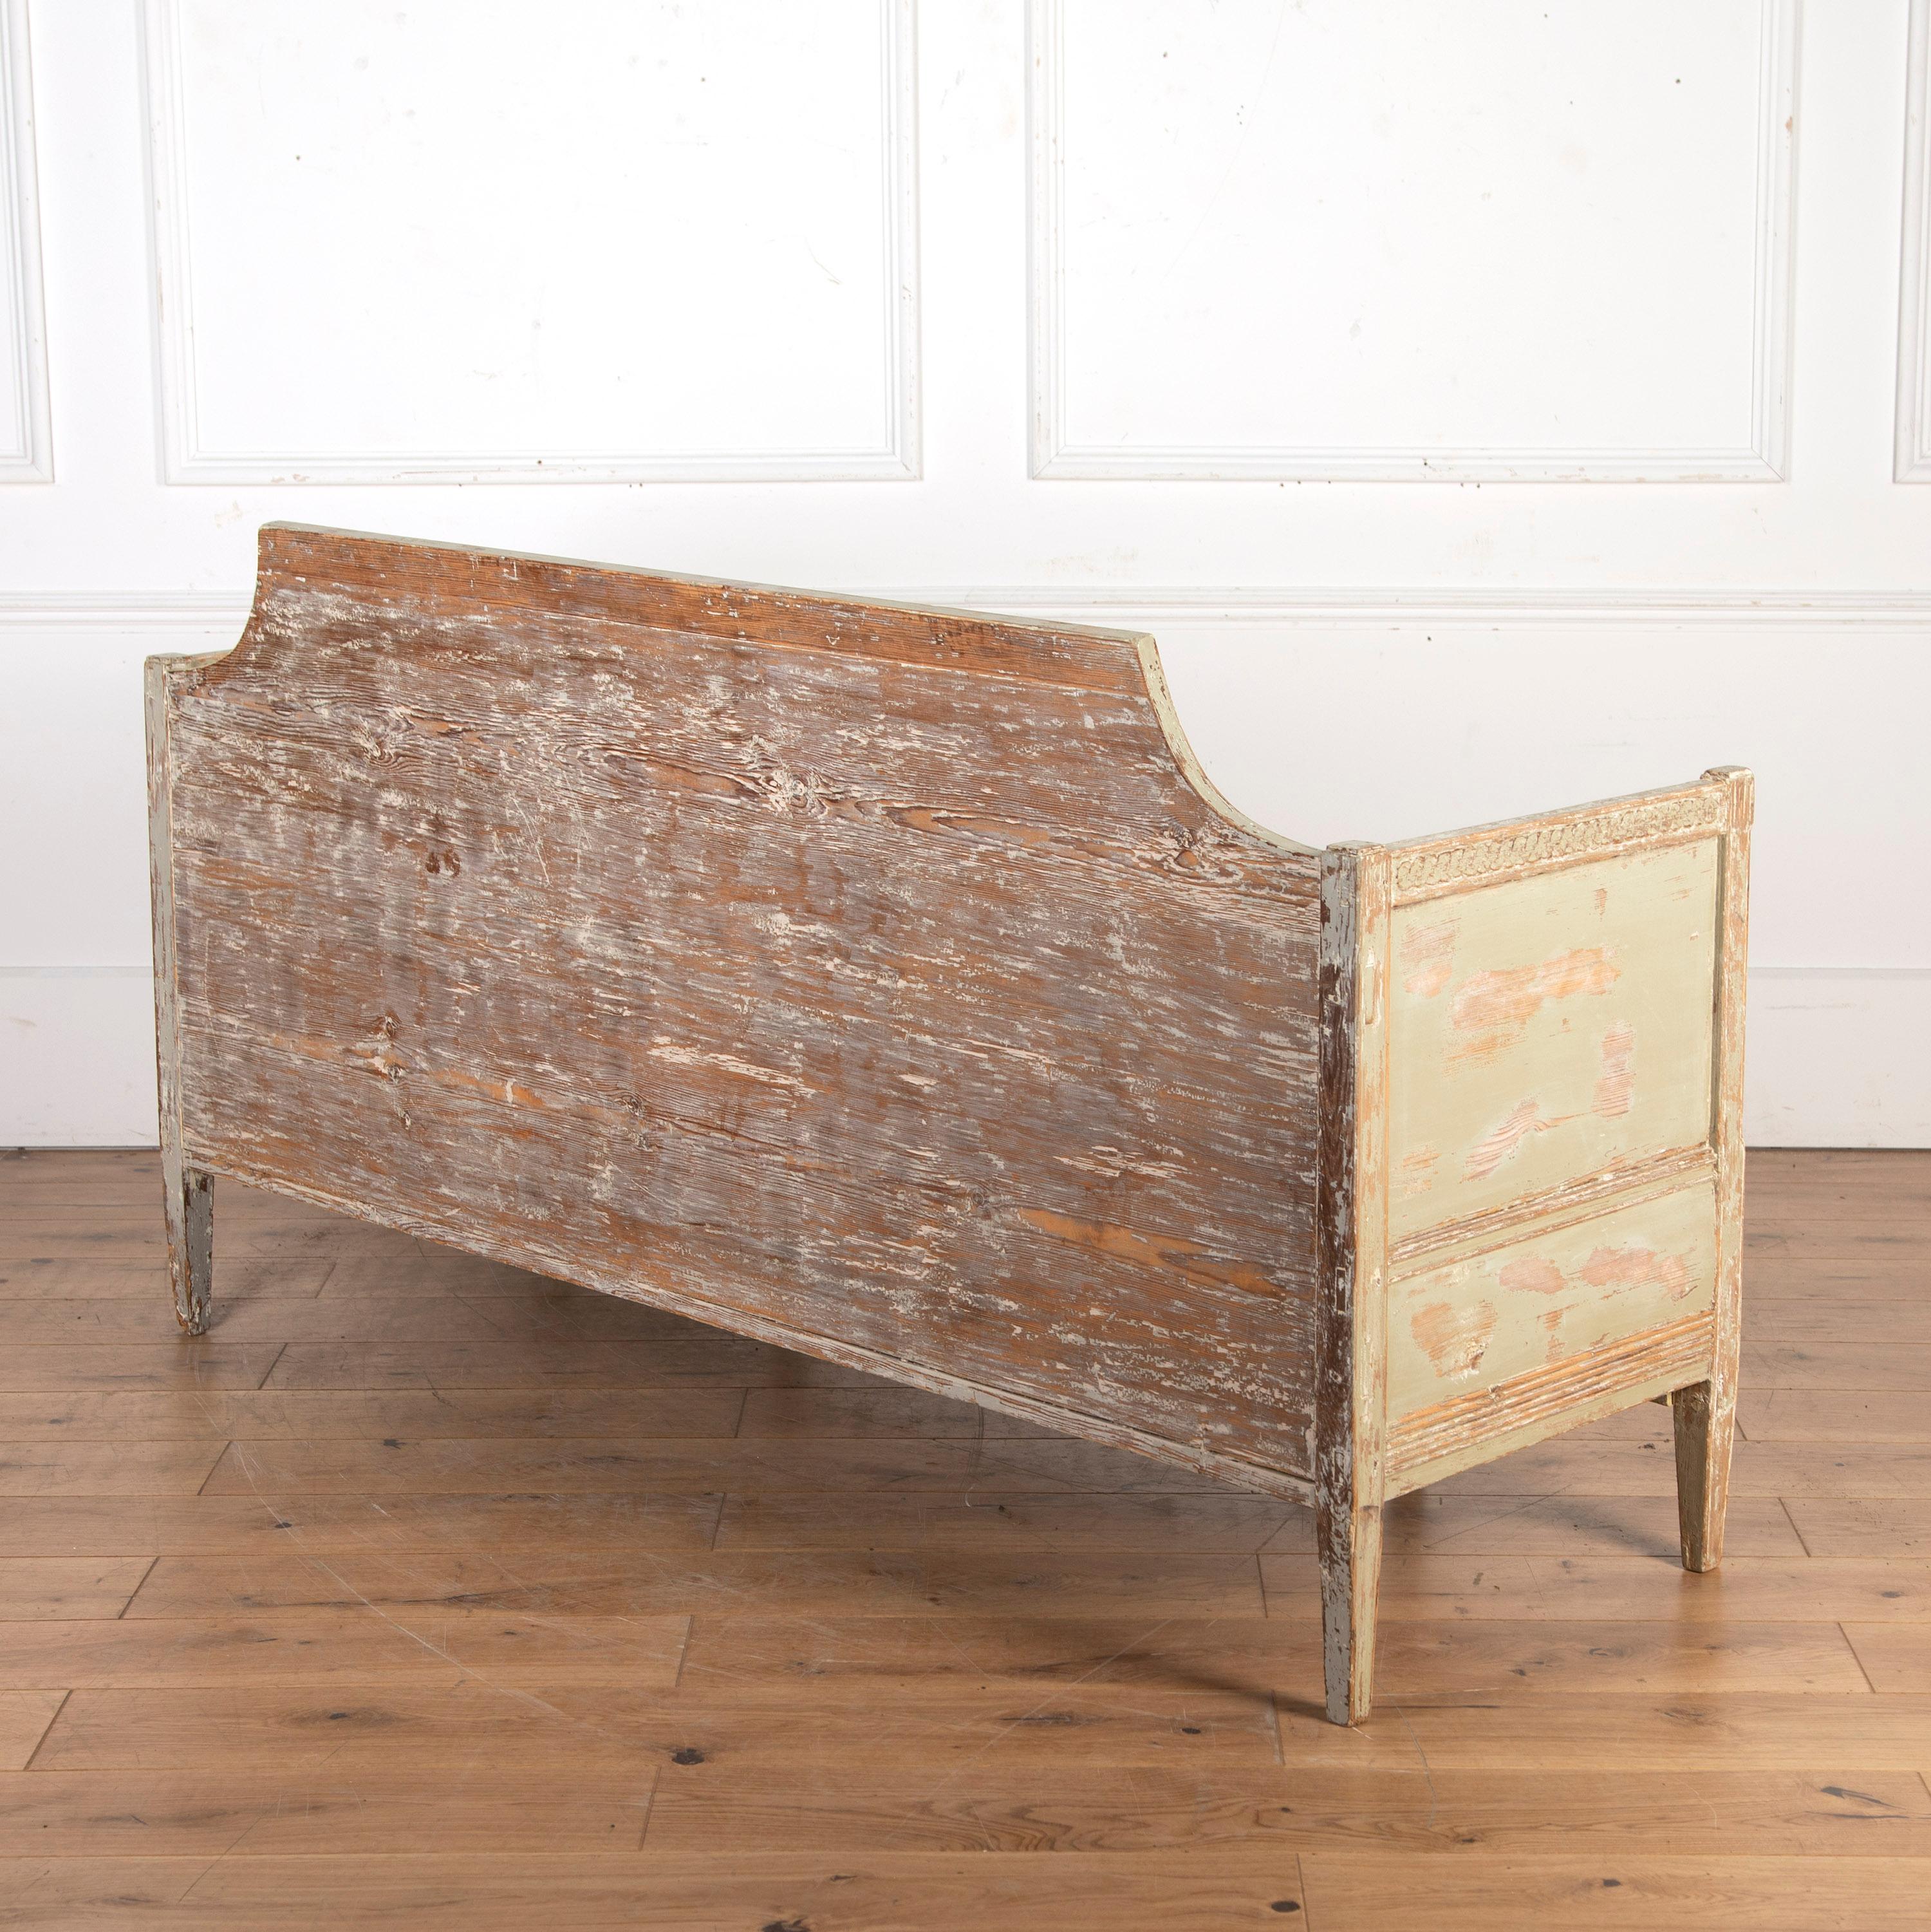 Early 19th Century Swedish painted sofa. 

This bench has been dry scraped back to its original sage green paint. The sofas seat has been stripped down to its calico interior and can be upholstered to your own specifications. Under the seat, there